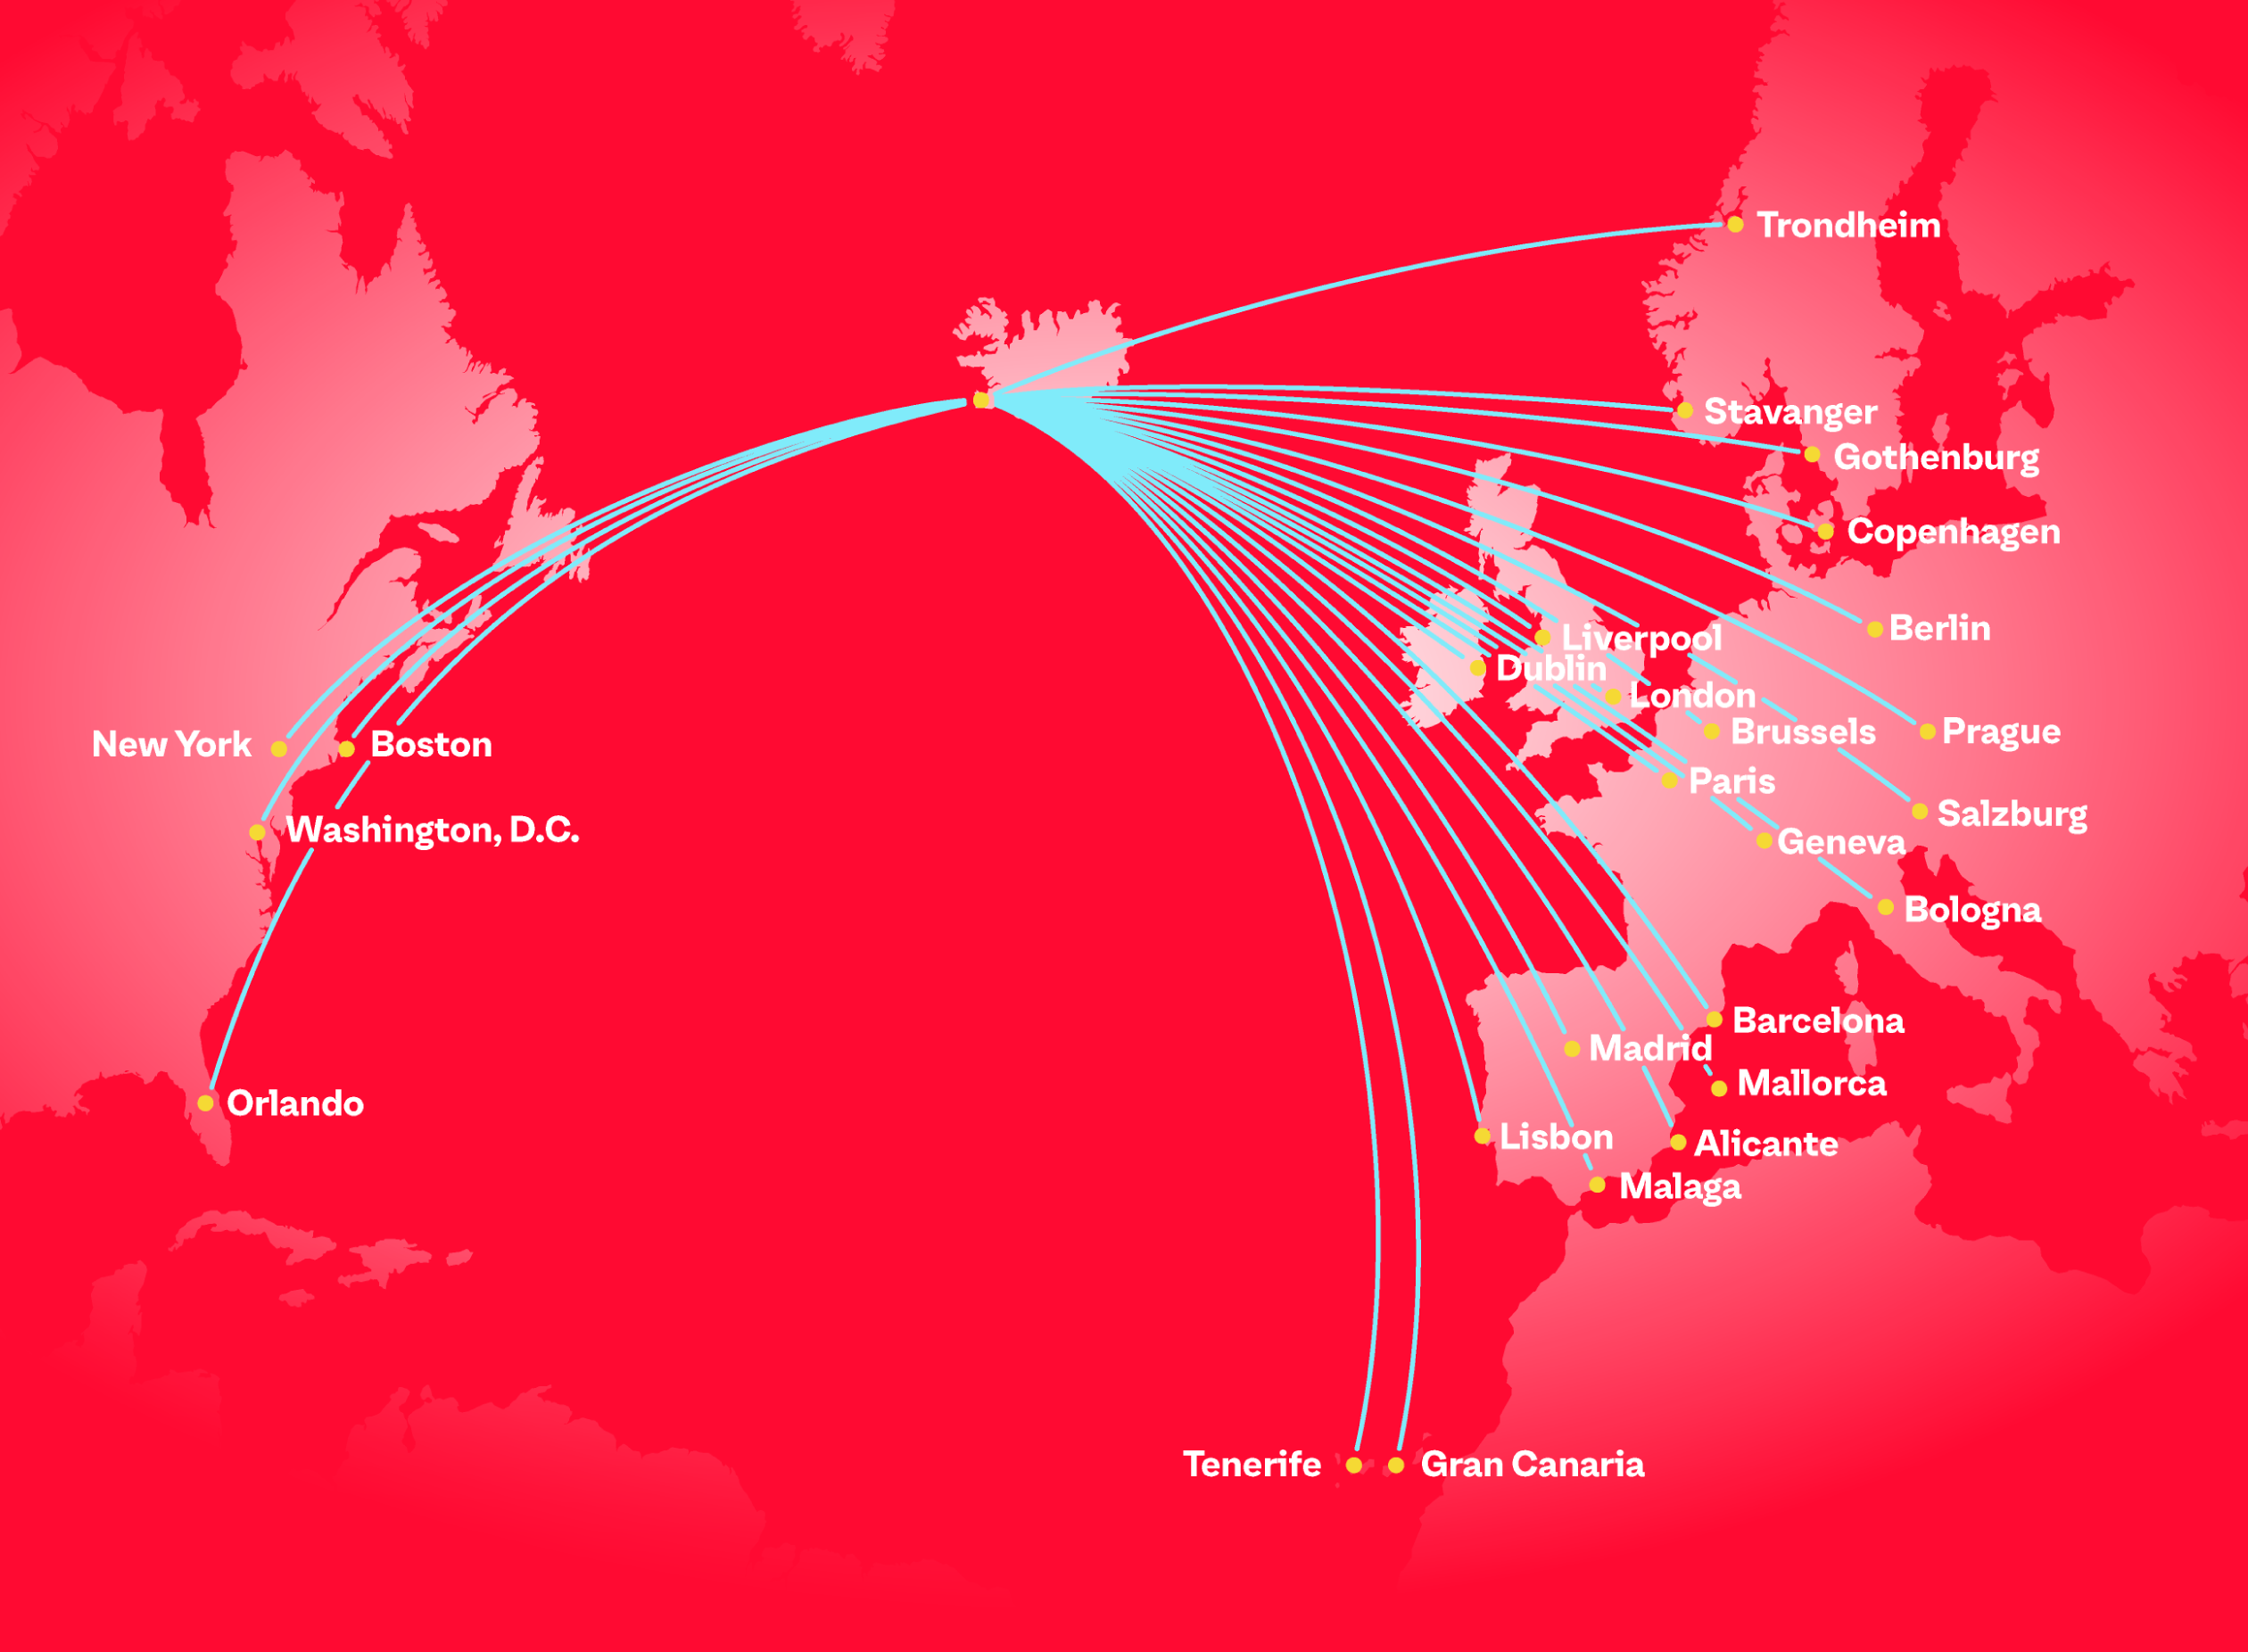 Iceland PLAY airline route map